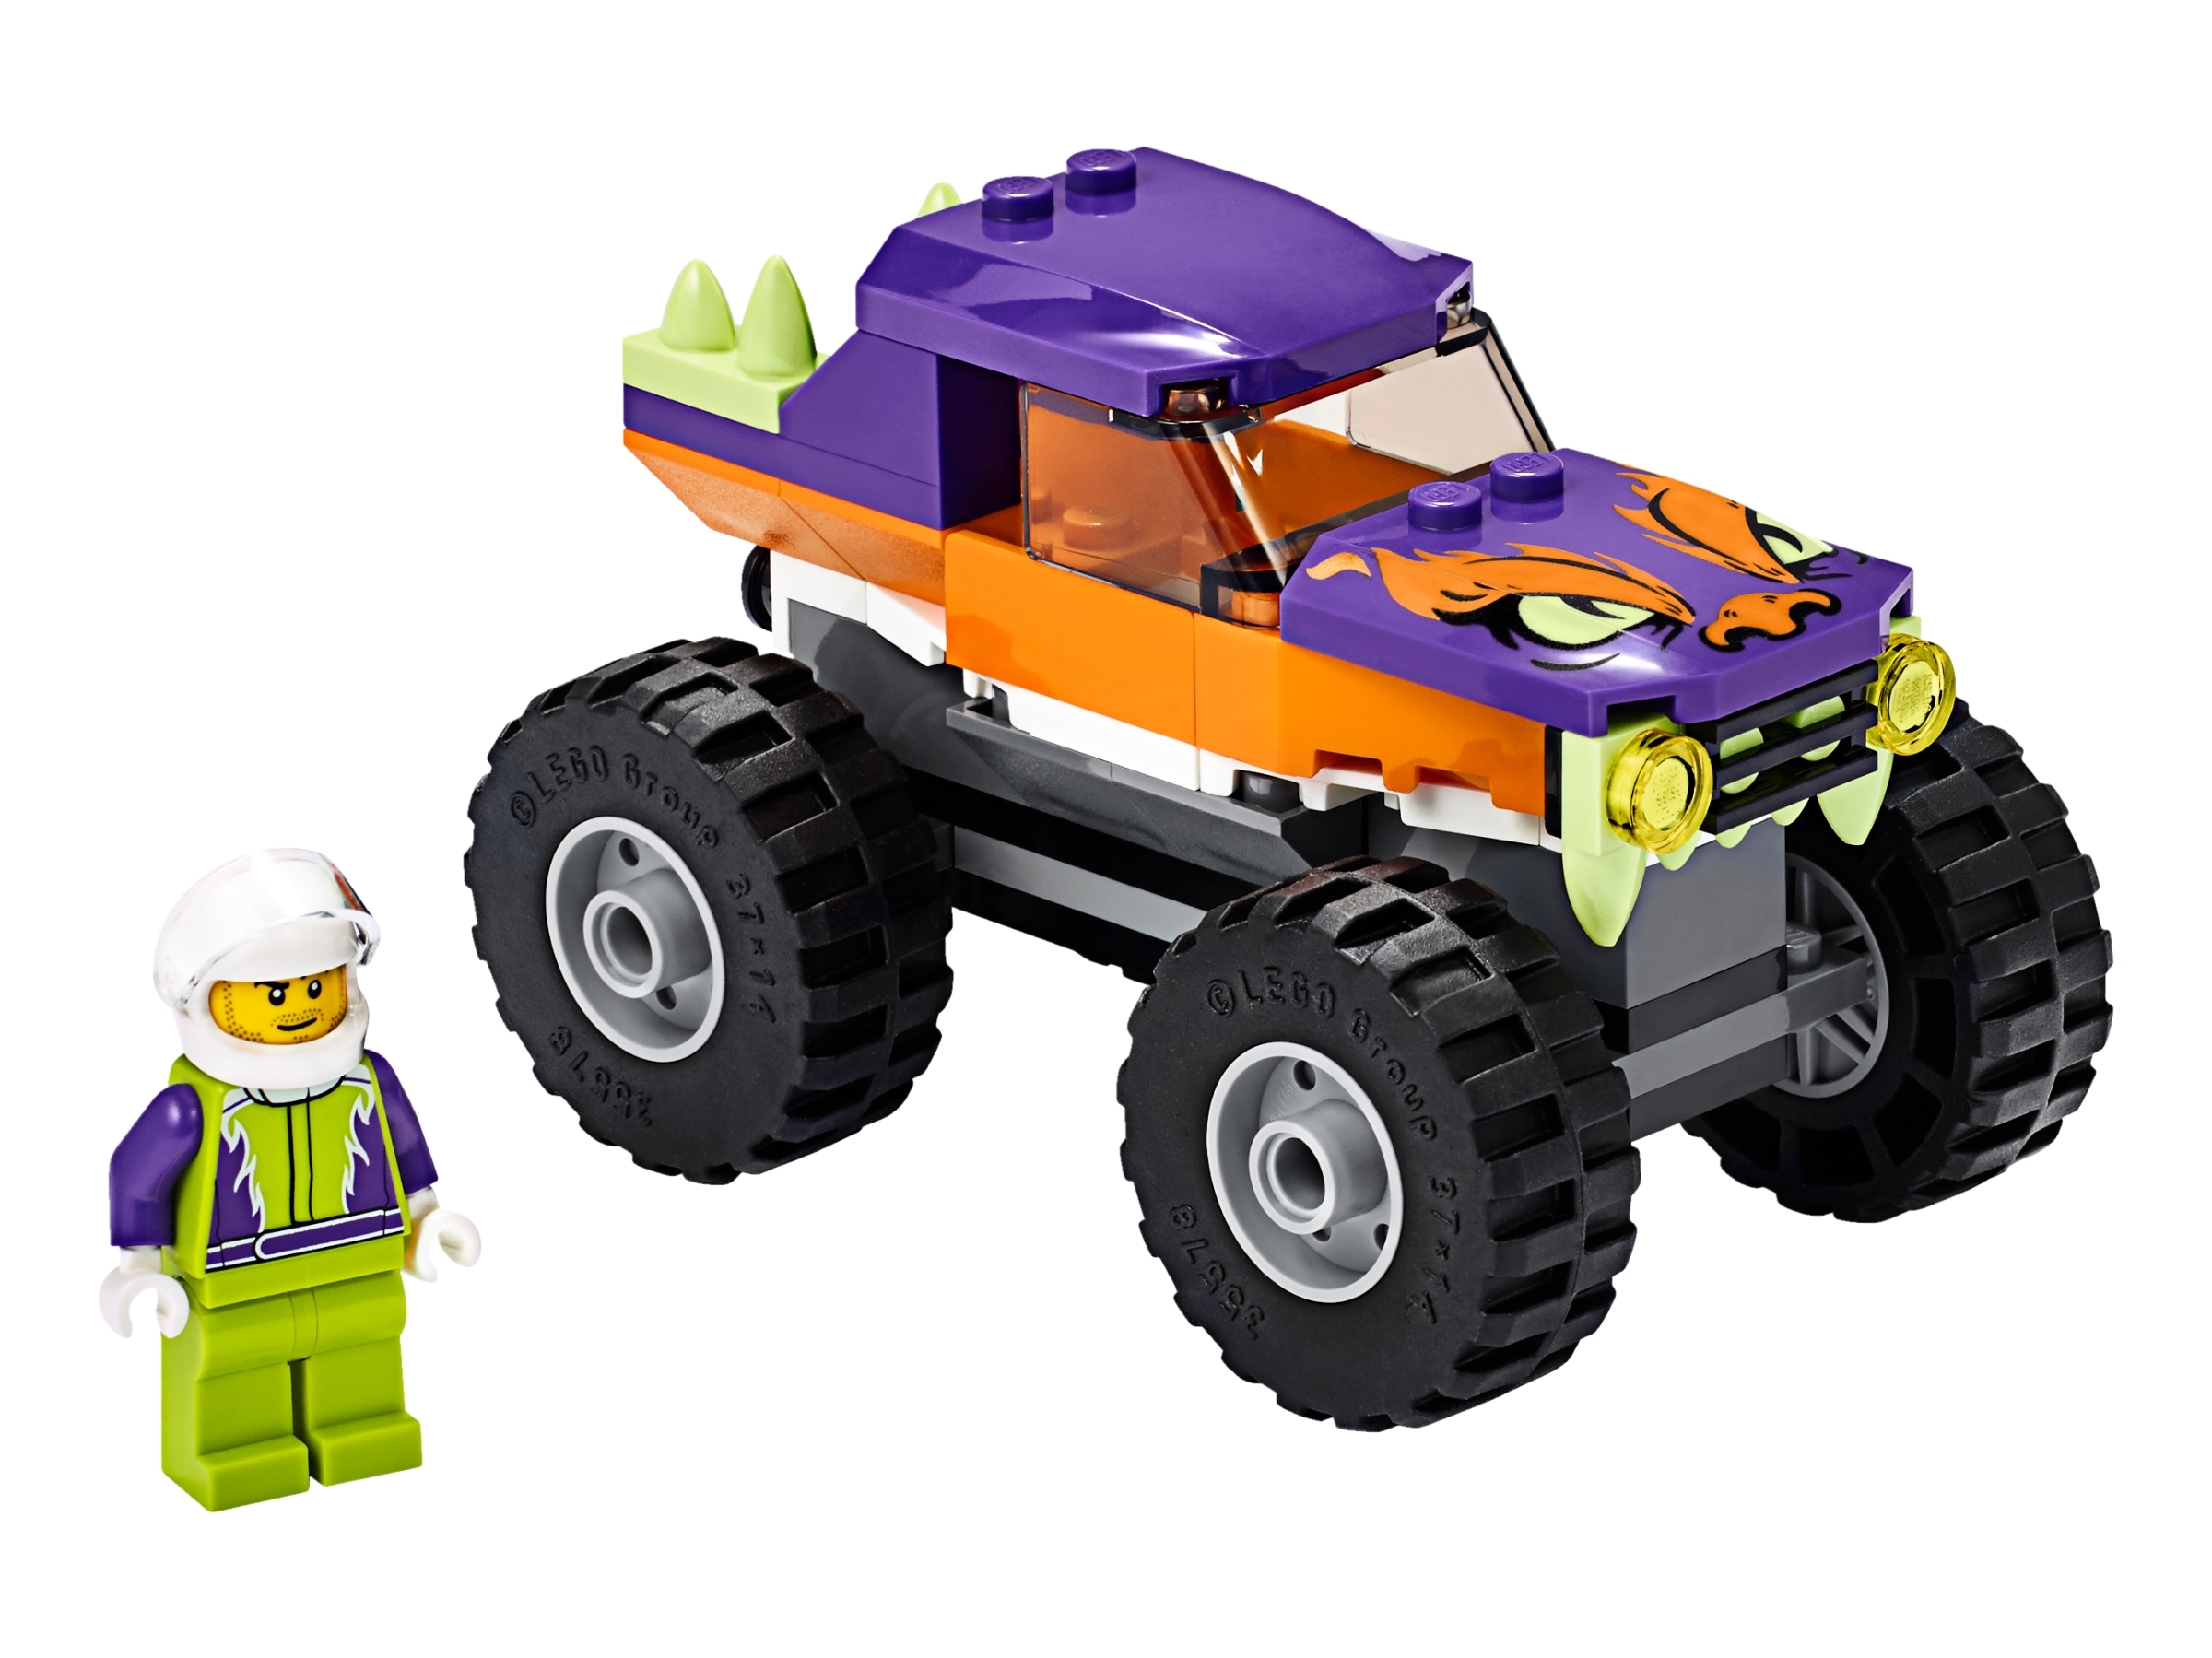 Hot Wheels Monster Truck Lego | peacecommission.kdsg.gov.ng